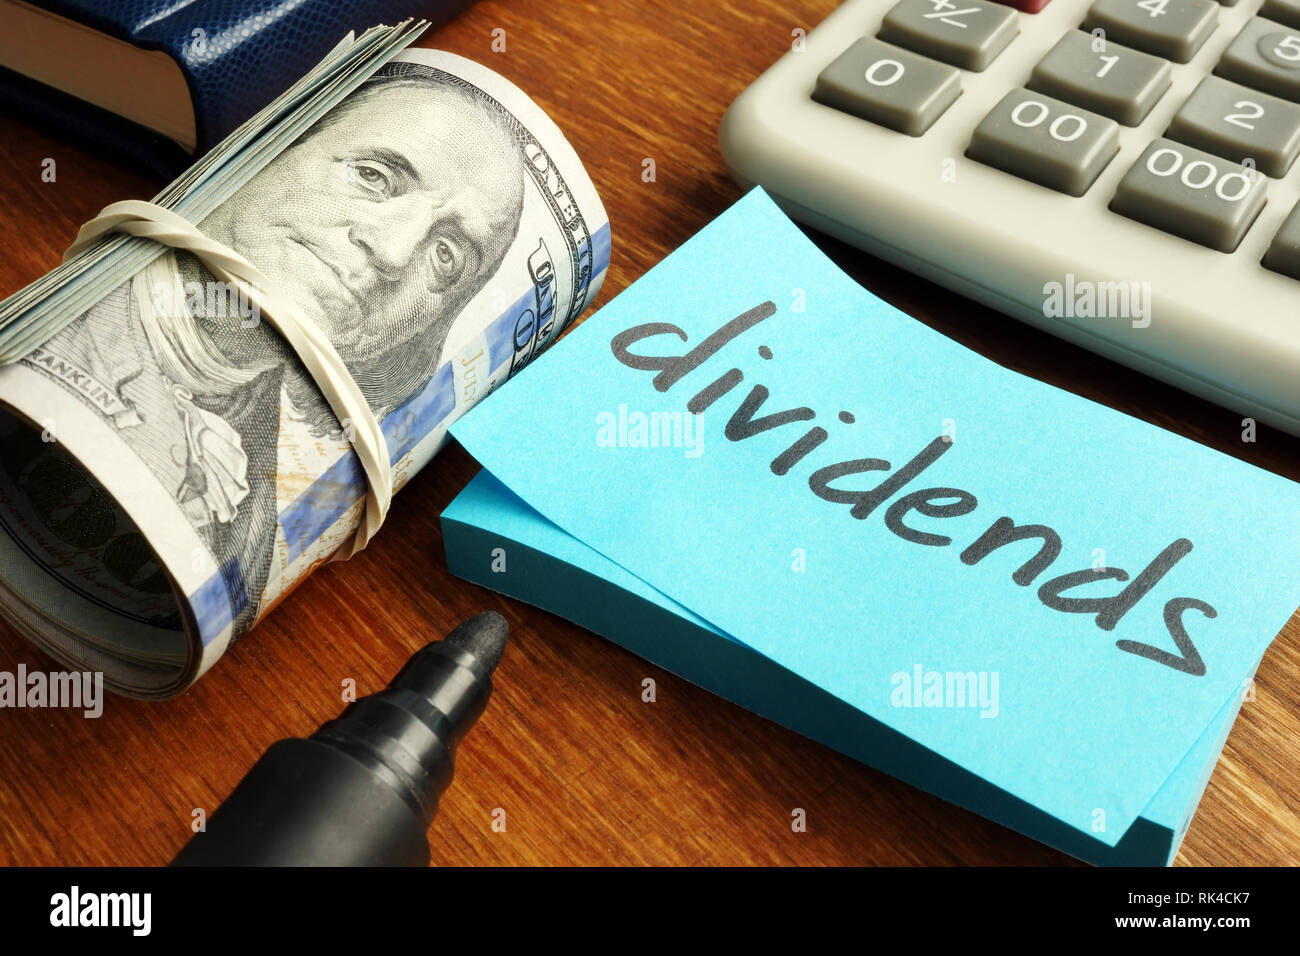 Dividends concept. Stack of dollars and calculator. Stock Photo